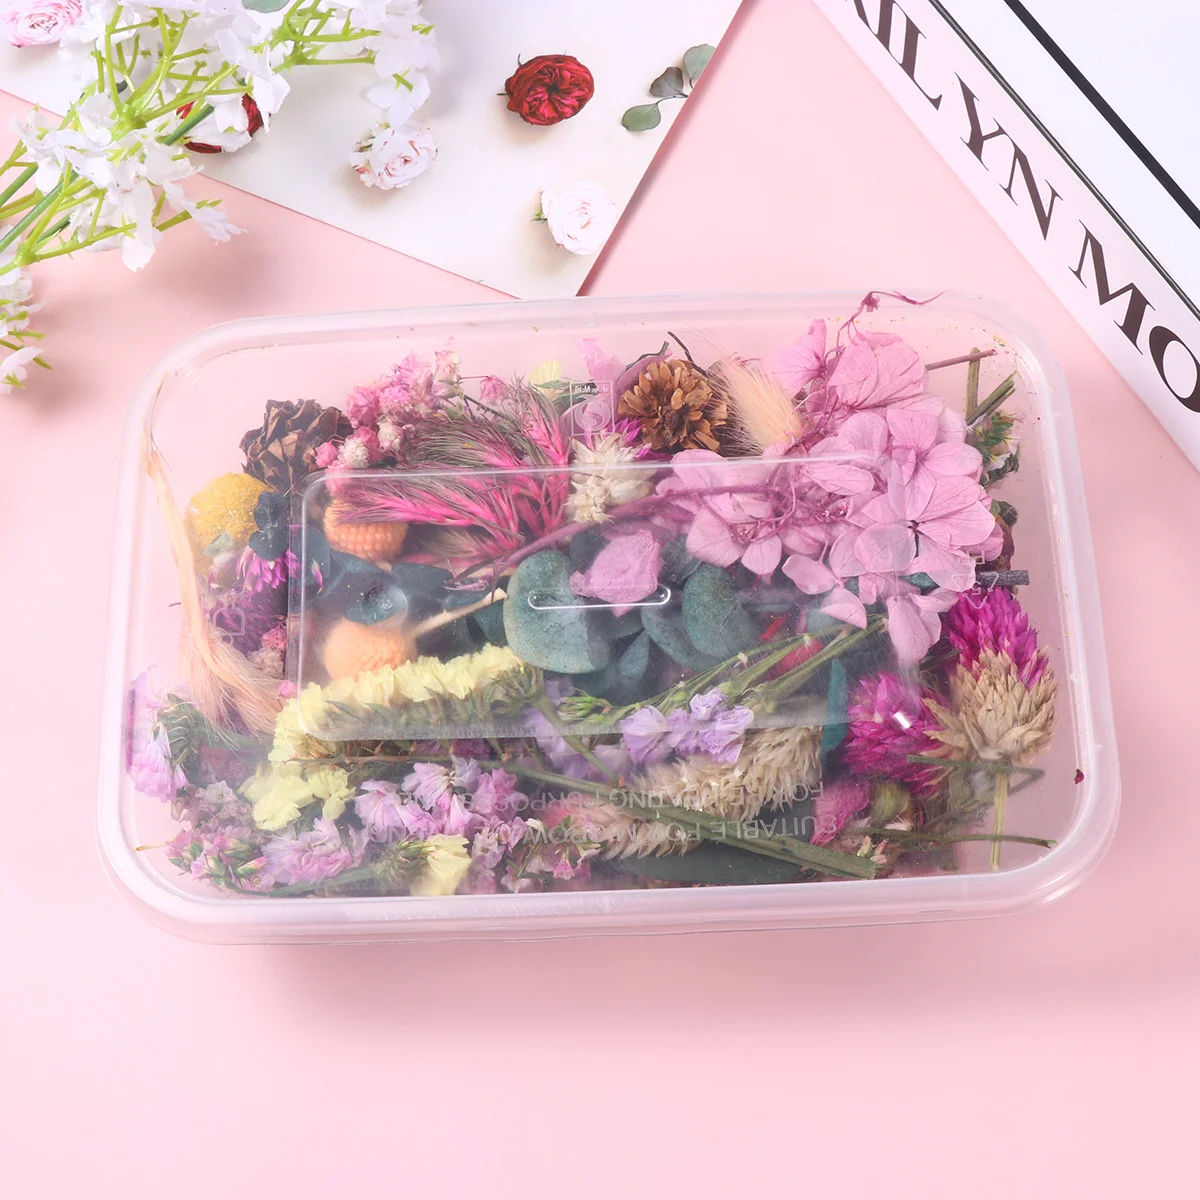 

Flowers Dried Flower Pressed Nail Resin Dry Natural Diy Mixed Making Real Scrapbooking Jewelry Bath Multiple Bookmark Leaves